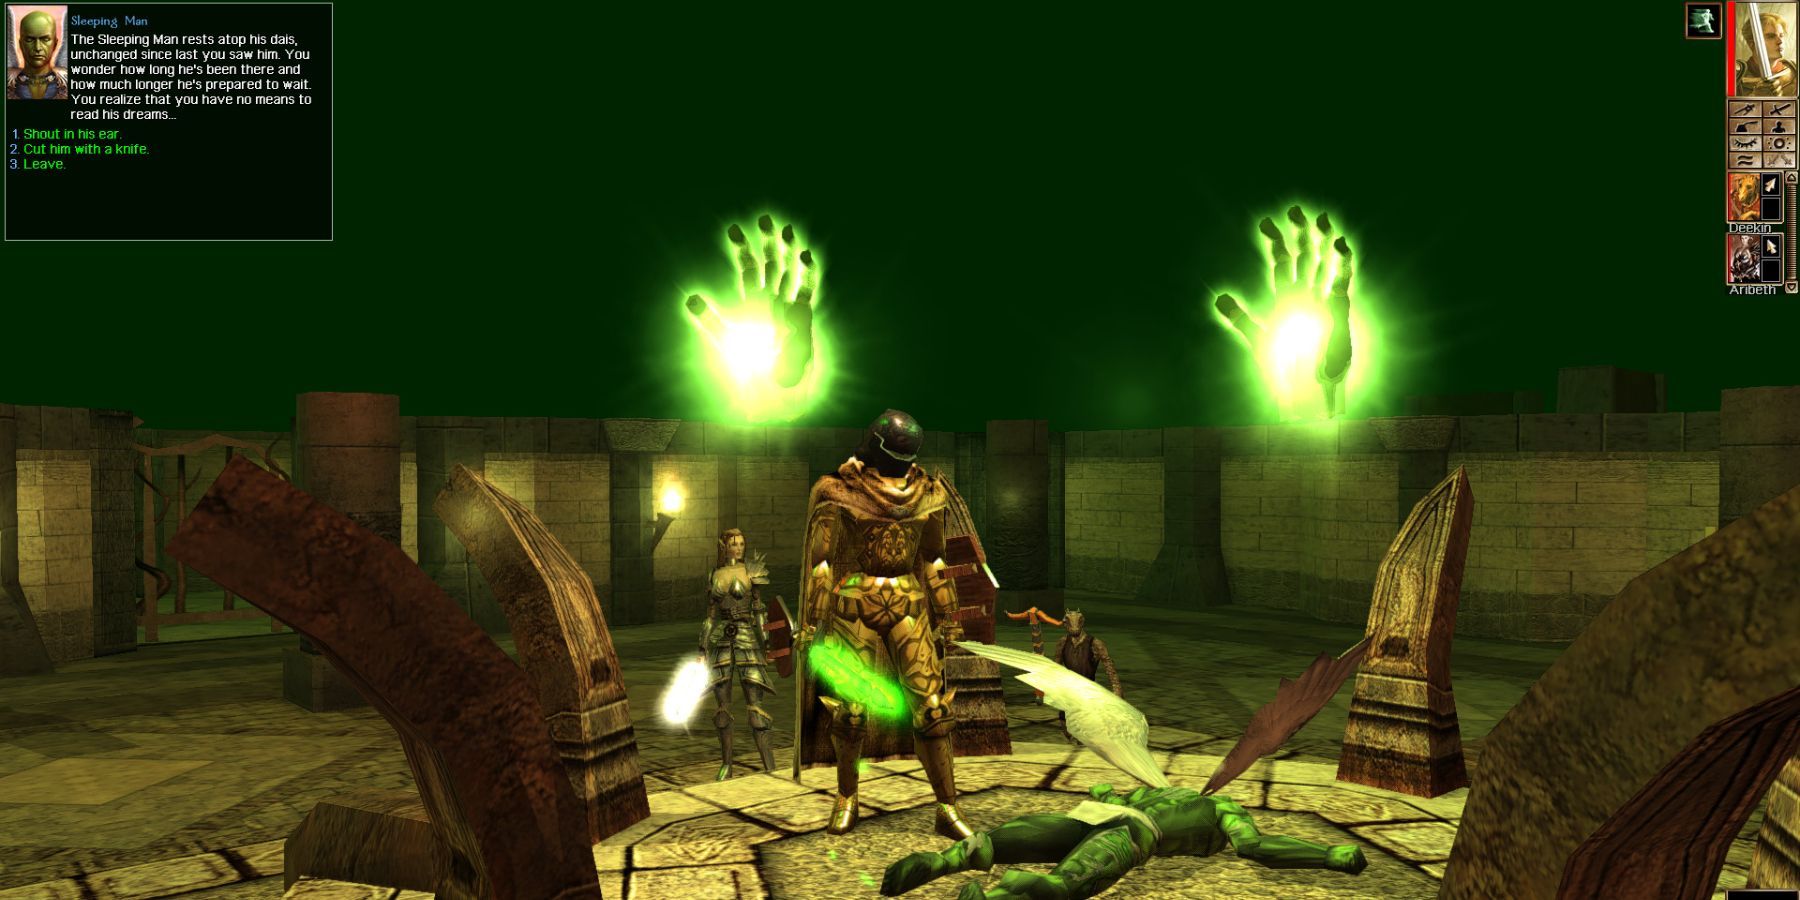 A player examining a body in the middle of a room